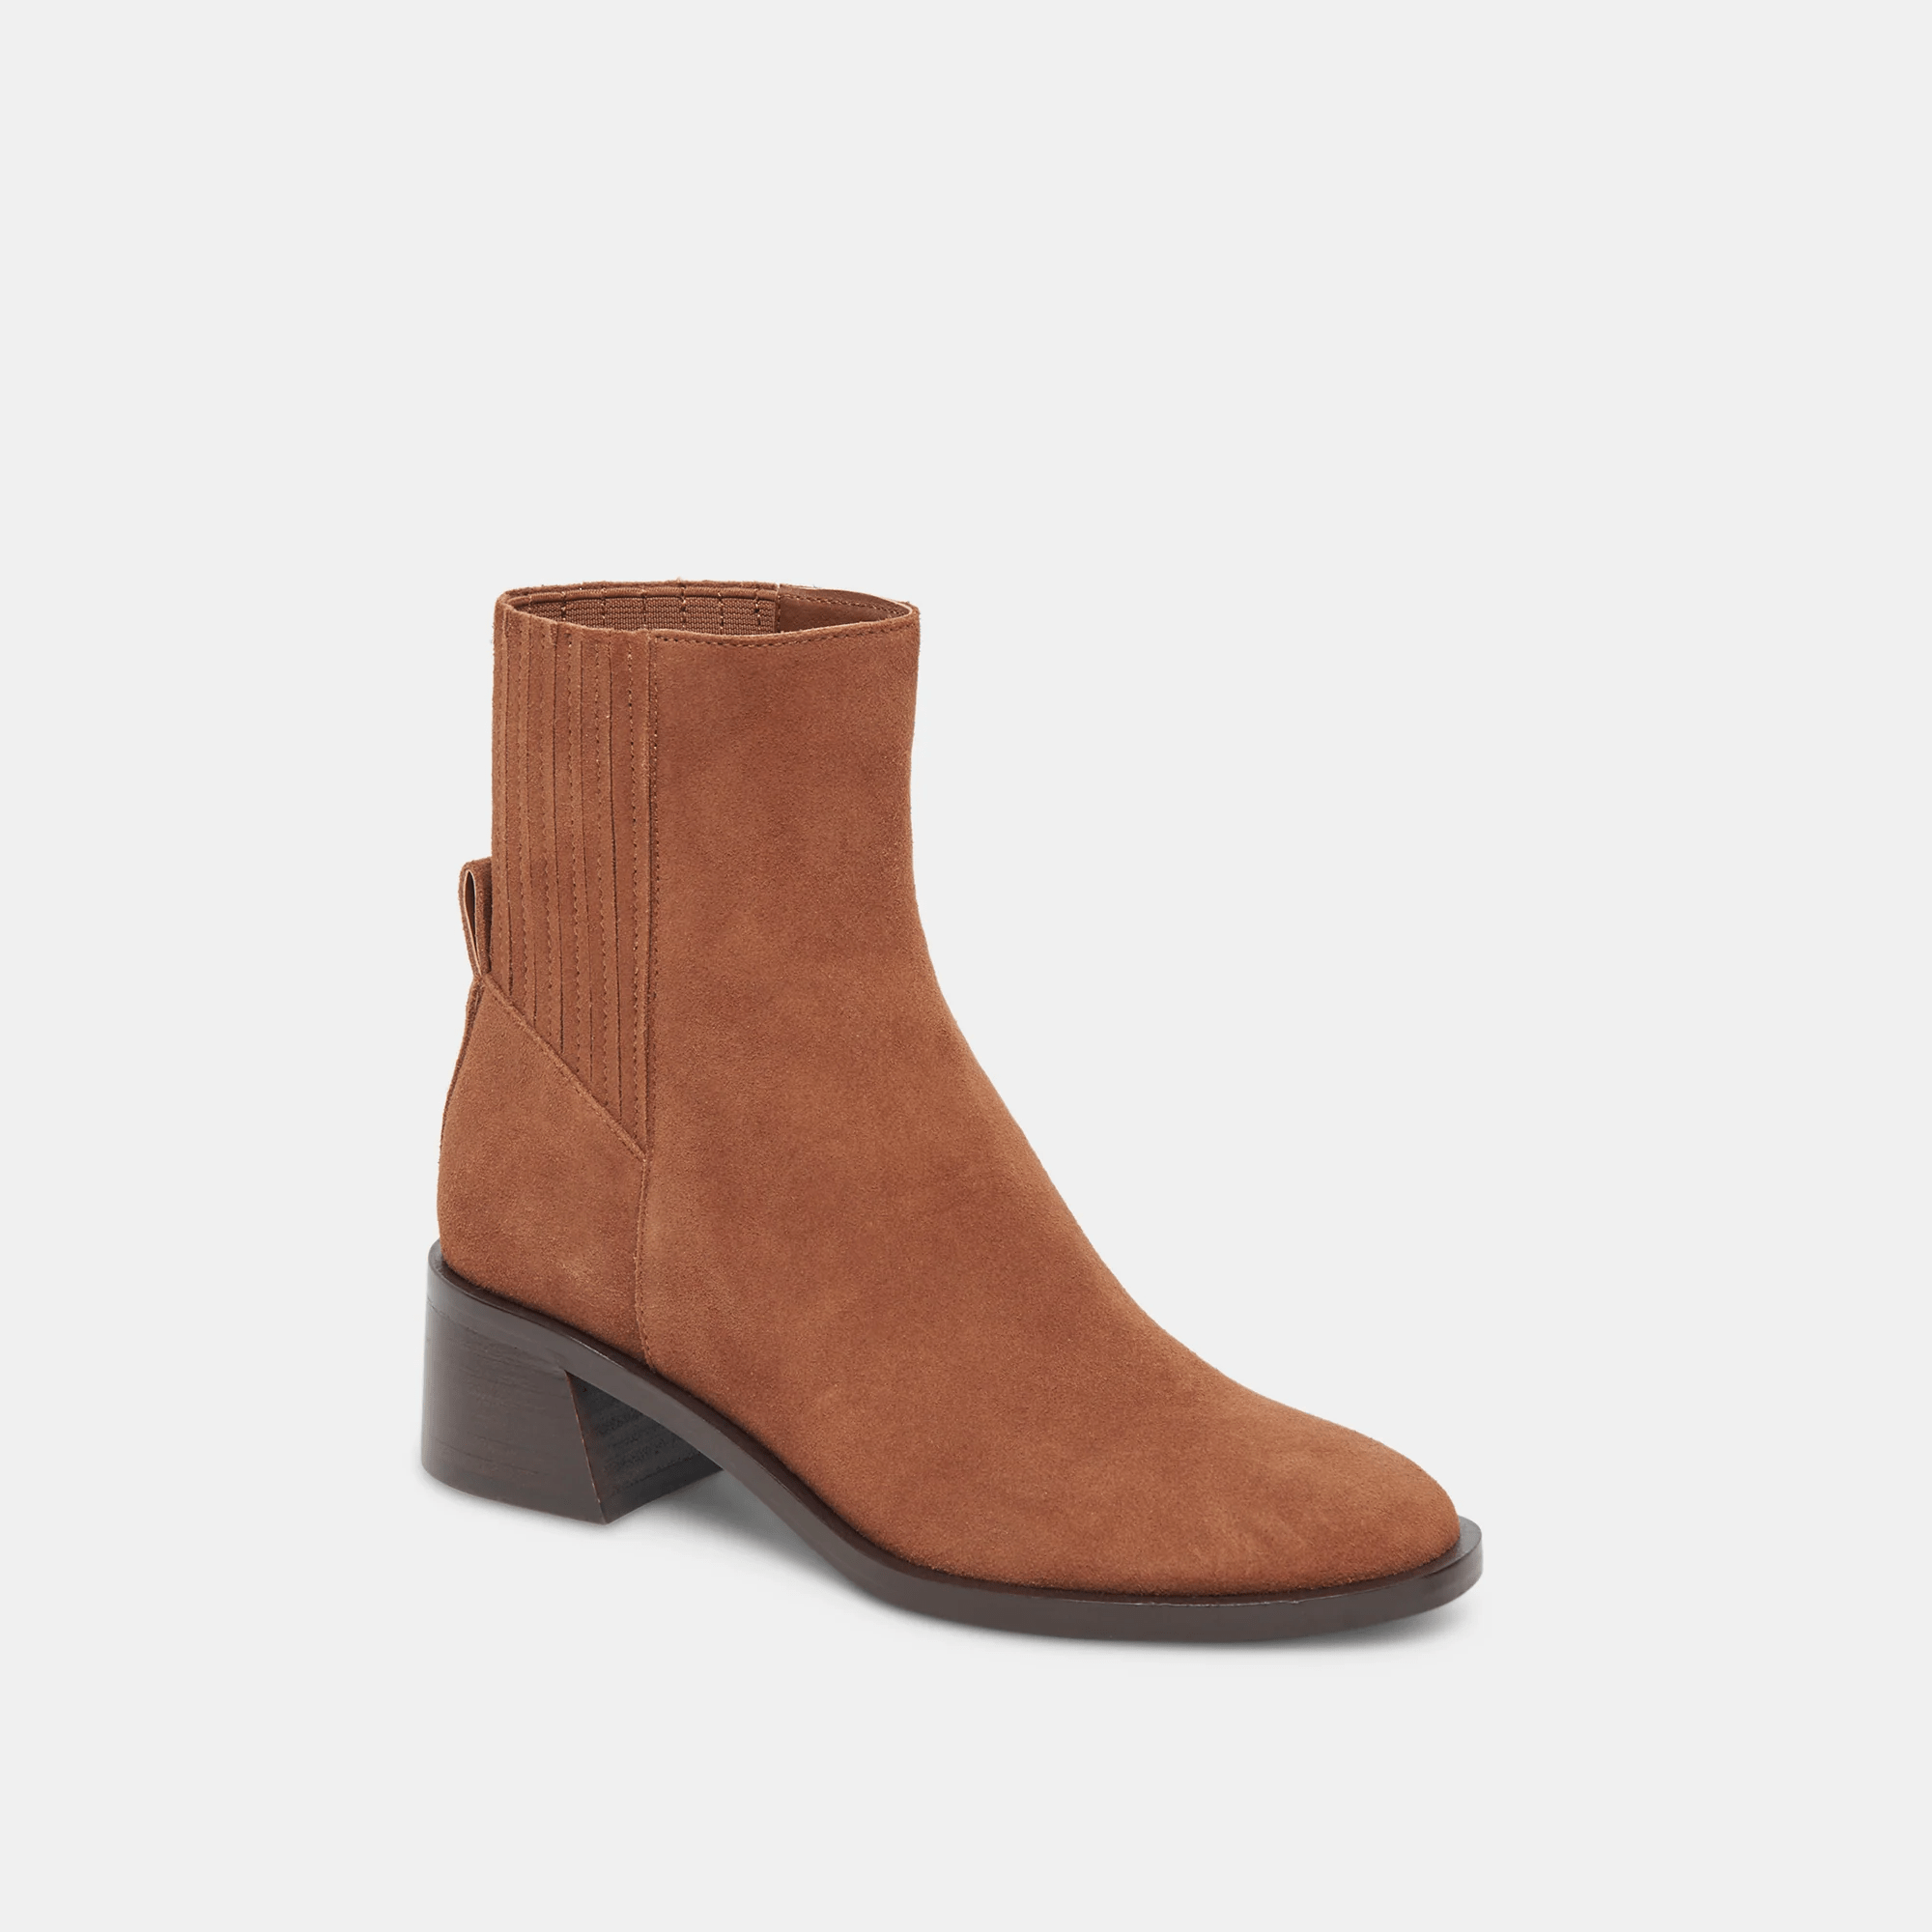 Linny H2O Brown Suede Bootie with All Season Protection -Dolce Vita Footwear, Inc.- Ruby Jane-